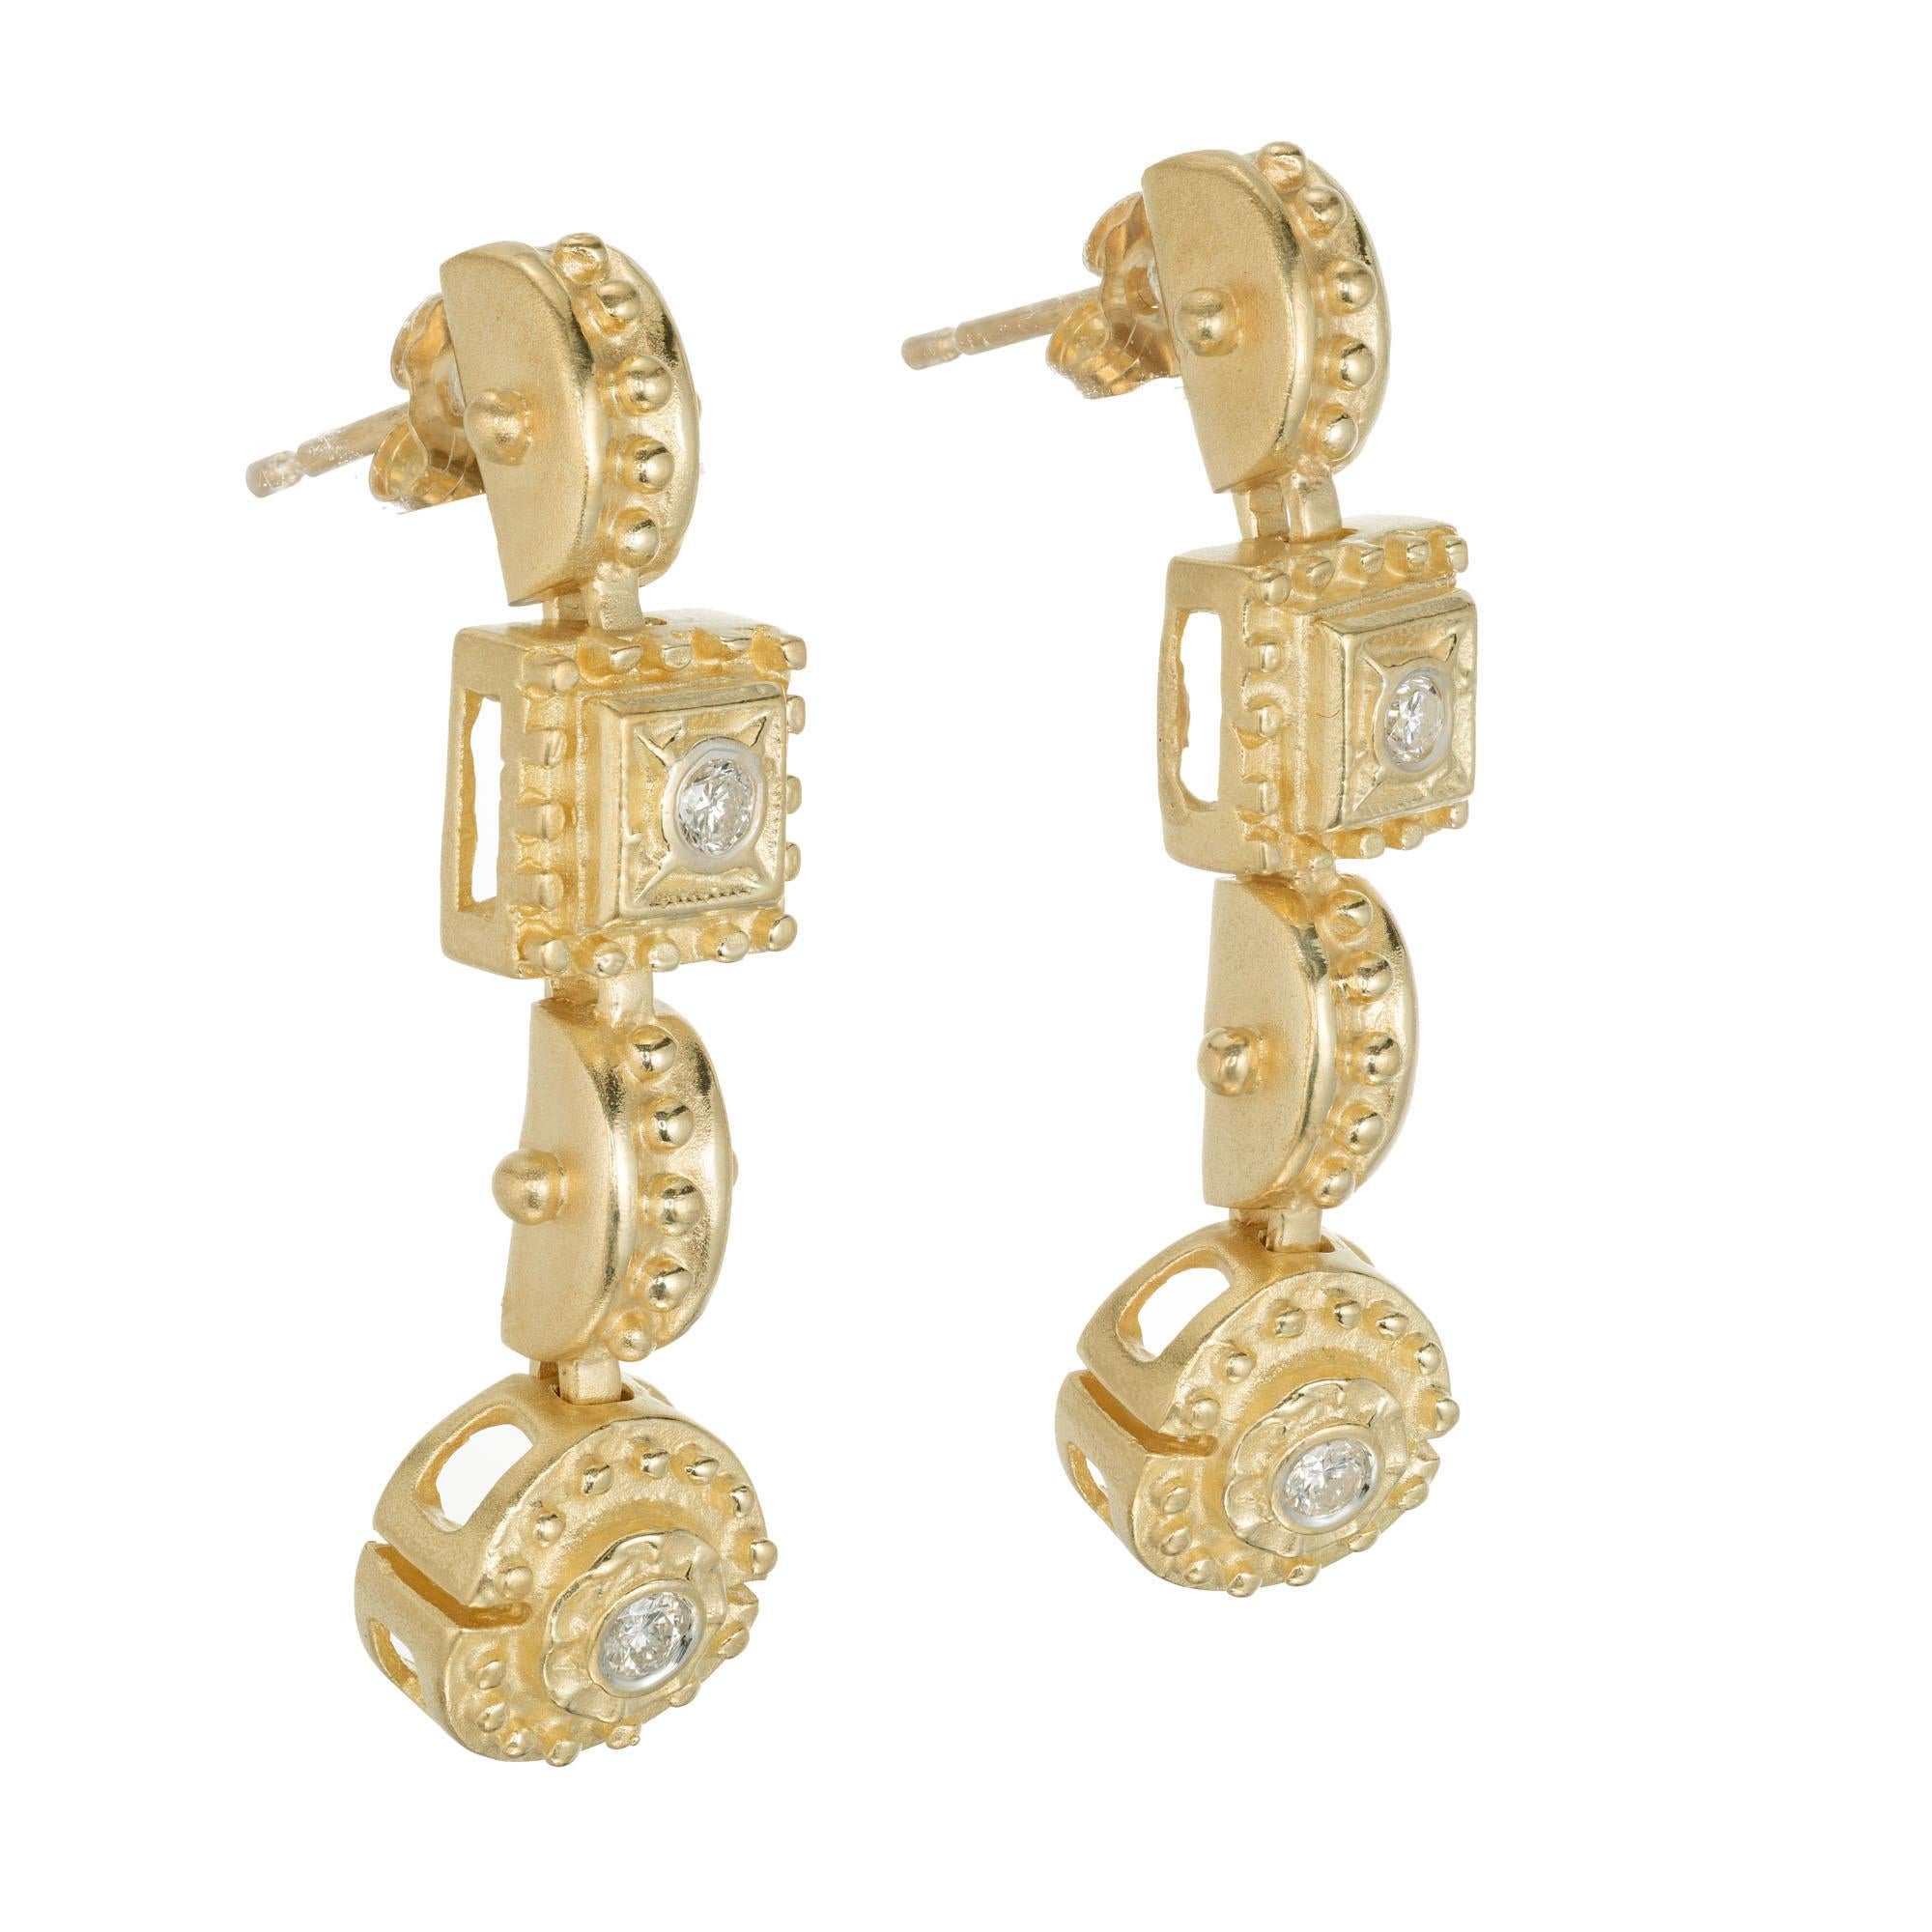 Etruscan style diamond dangle earrings in 14k yellow gold. 

4 round brilliant cut diamonds G SI, approx. .32cts
14k yellow gold 
Tested: 14k
10.2 grams
Top to bottom: 36.2mm or 1 7/16 Inch
Width: 9.49mm or 5/16 Inch

